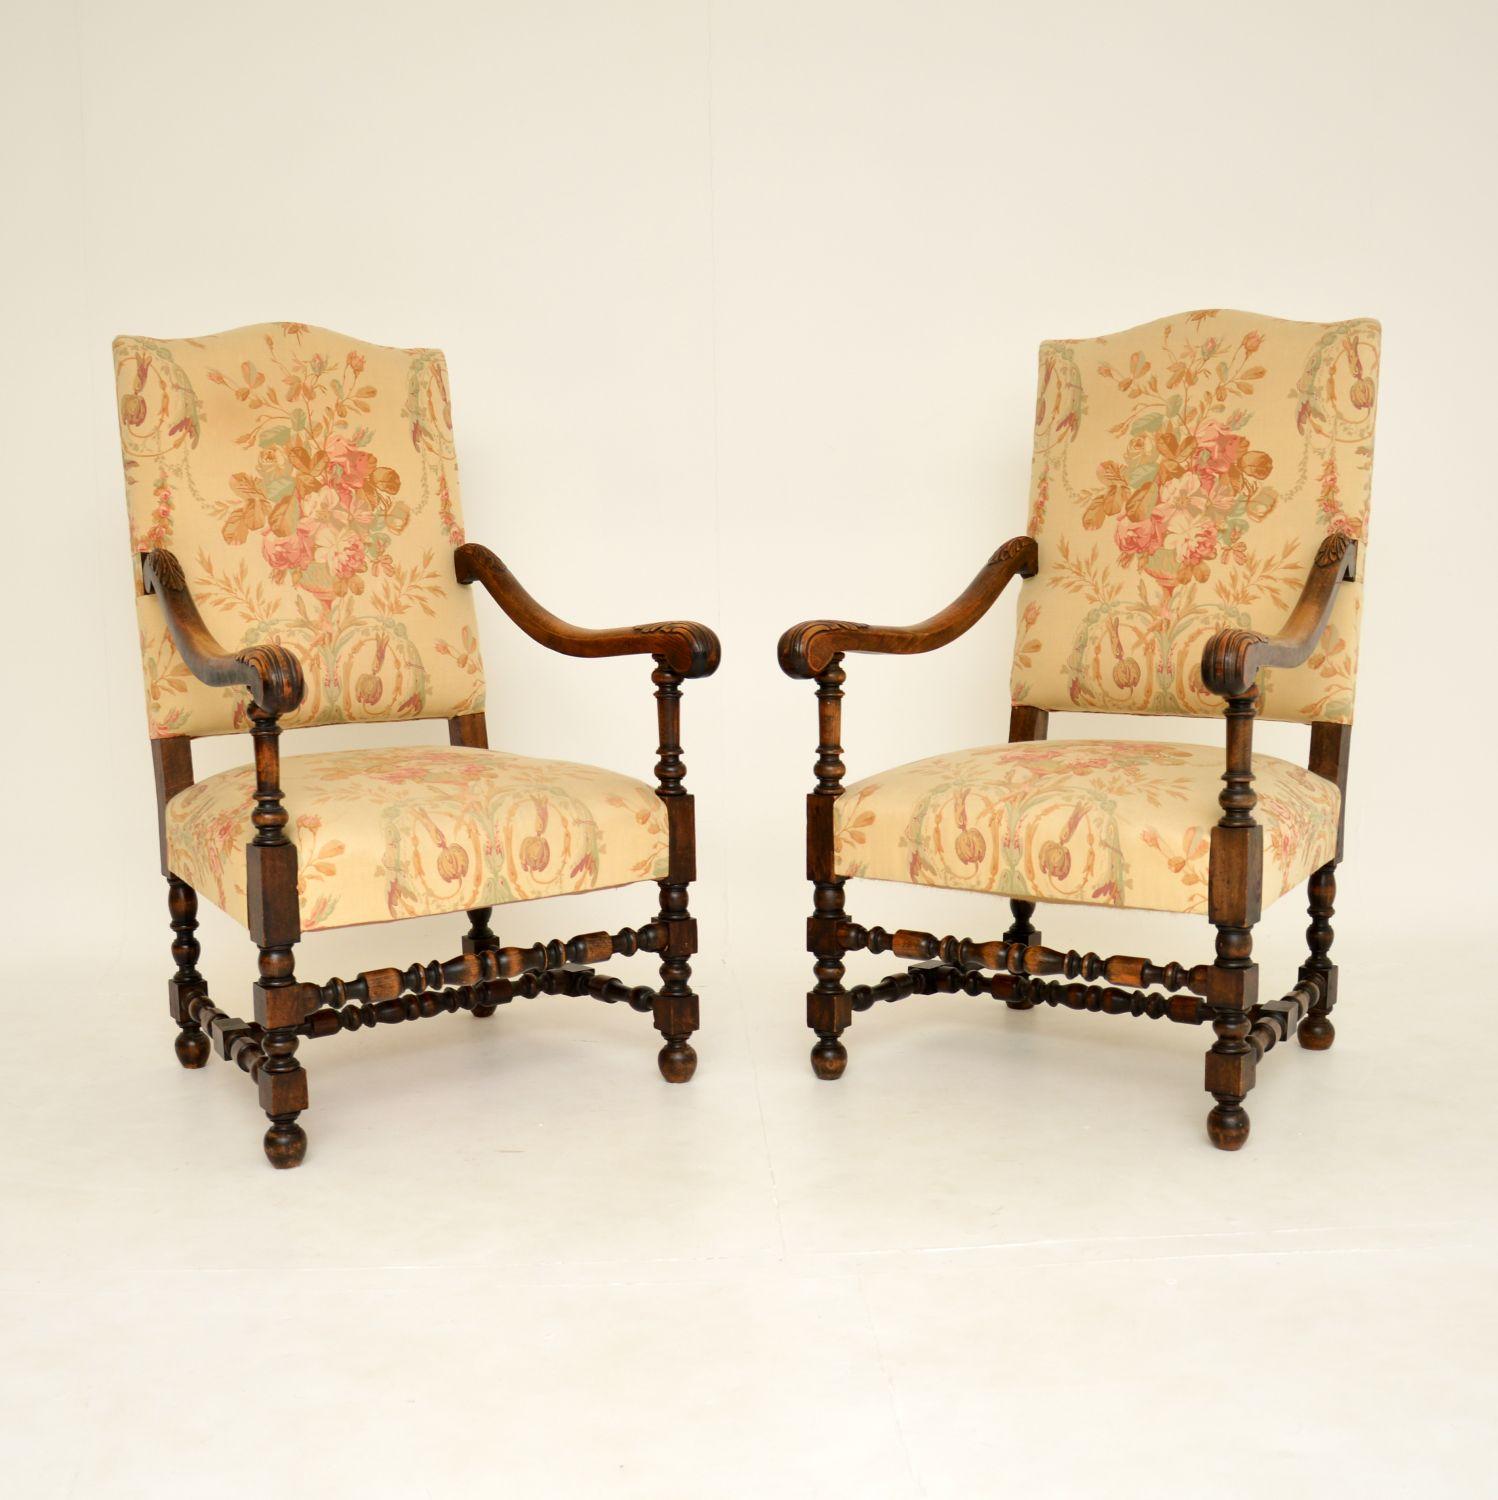 A wonderful pair of antique armchairs in the Carolean revival style. These were made in England, they date from around the 1890-1910 period.

They are of lovely quality, with beautiful acanthus leaf carving on the arms and excellent turned,